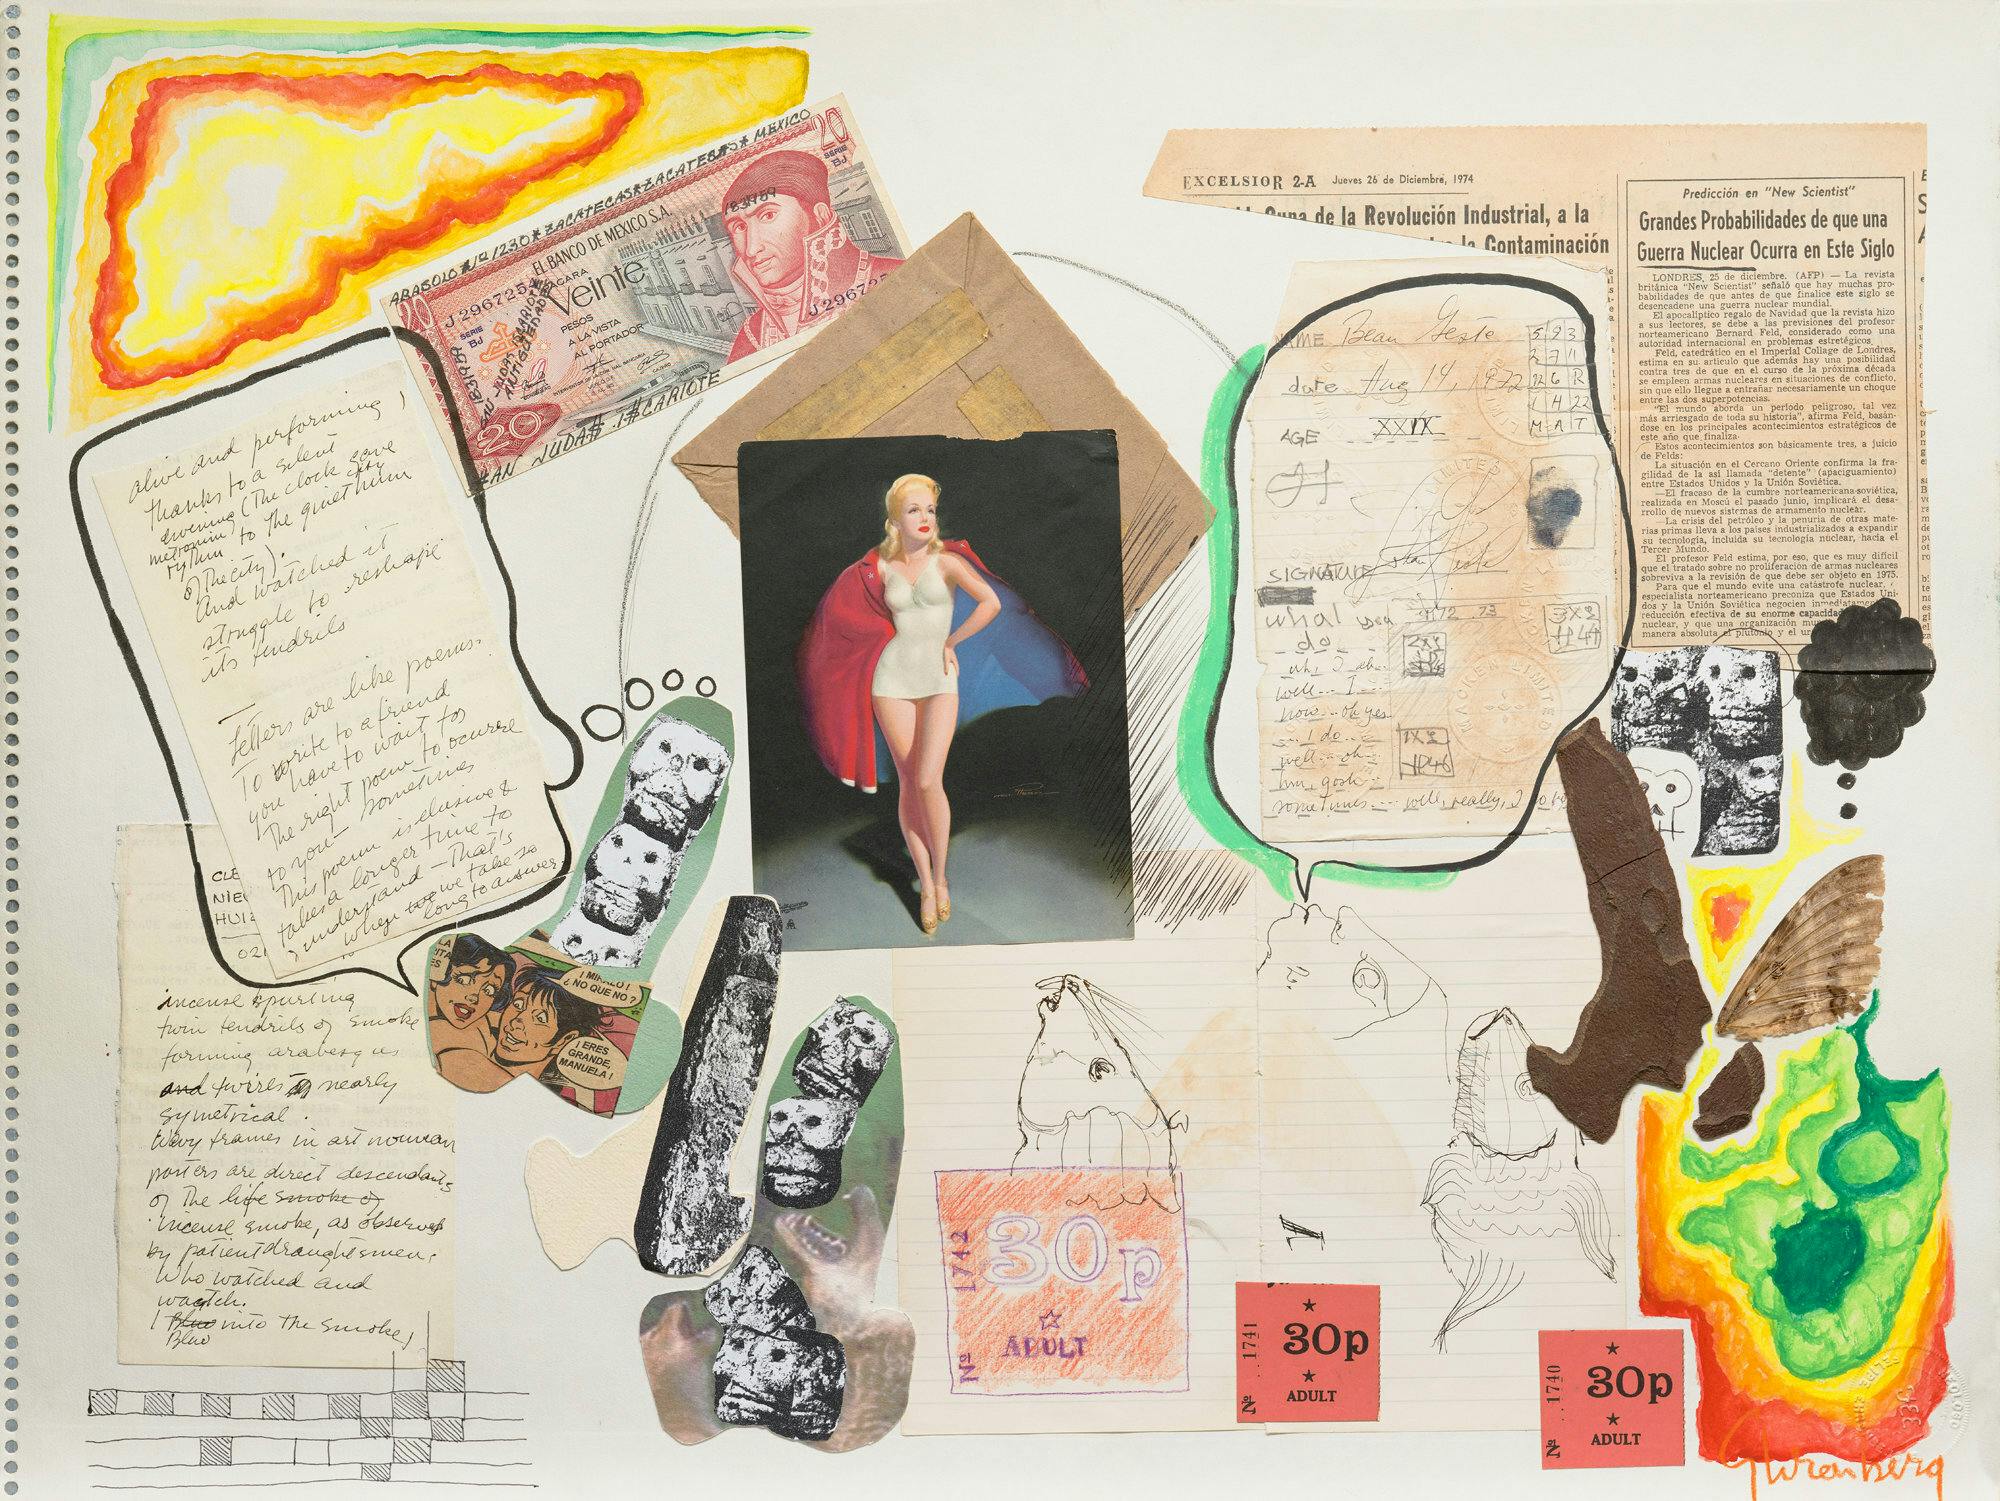 A collage showing fragments of newspaper clippings, currency, and photographs, overlaid with drawings.